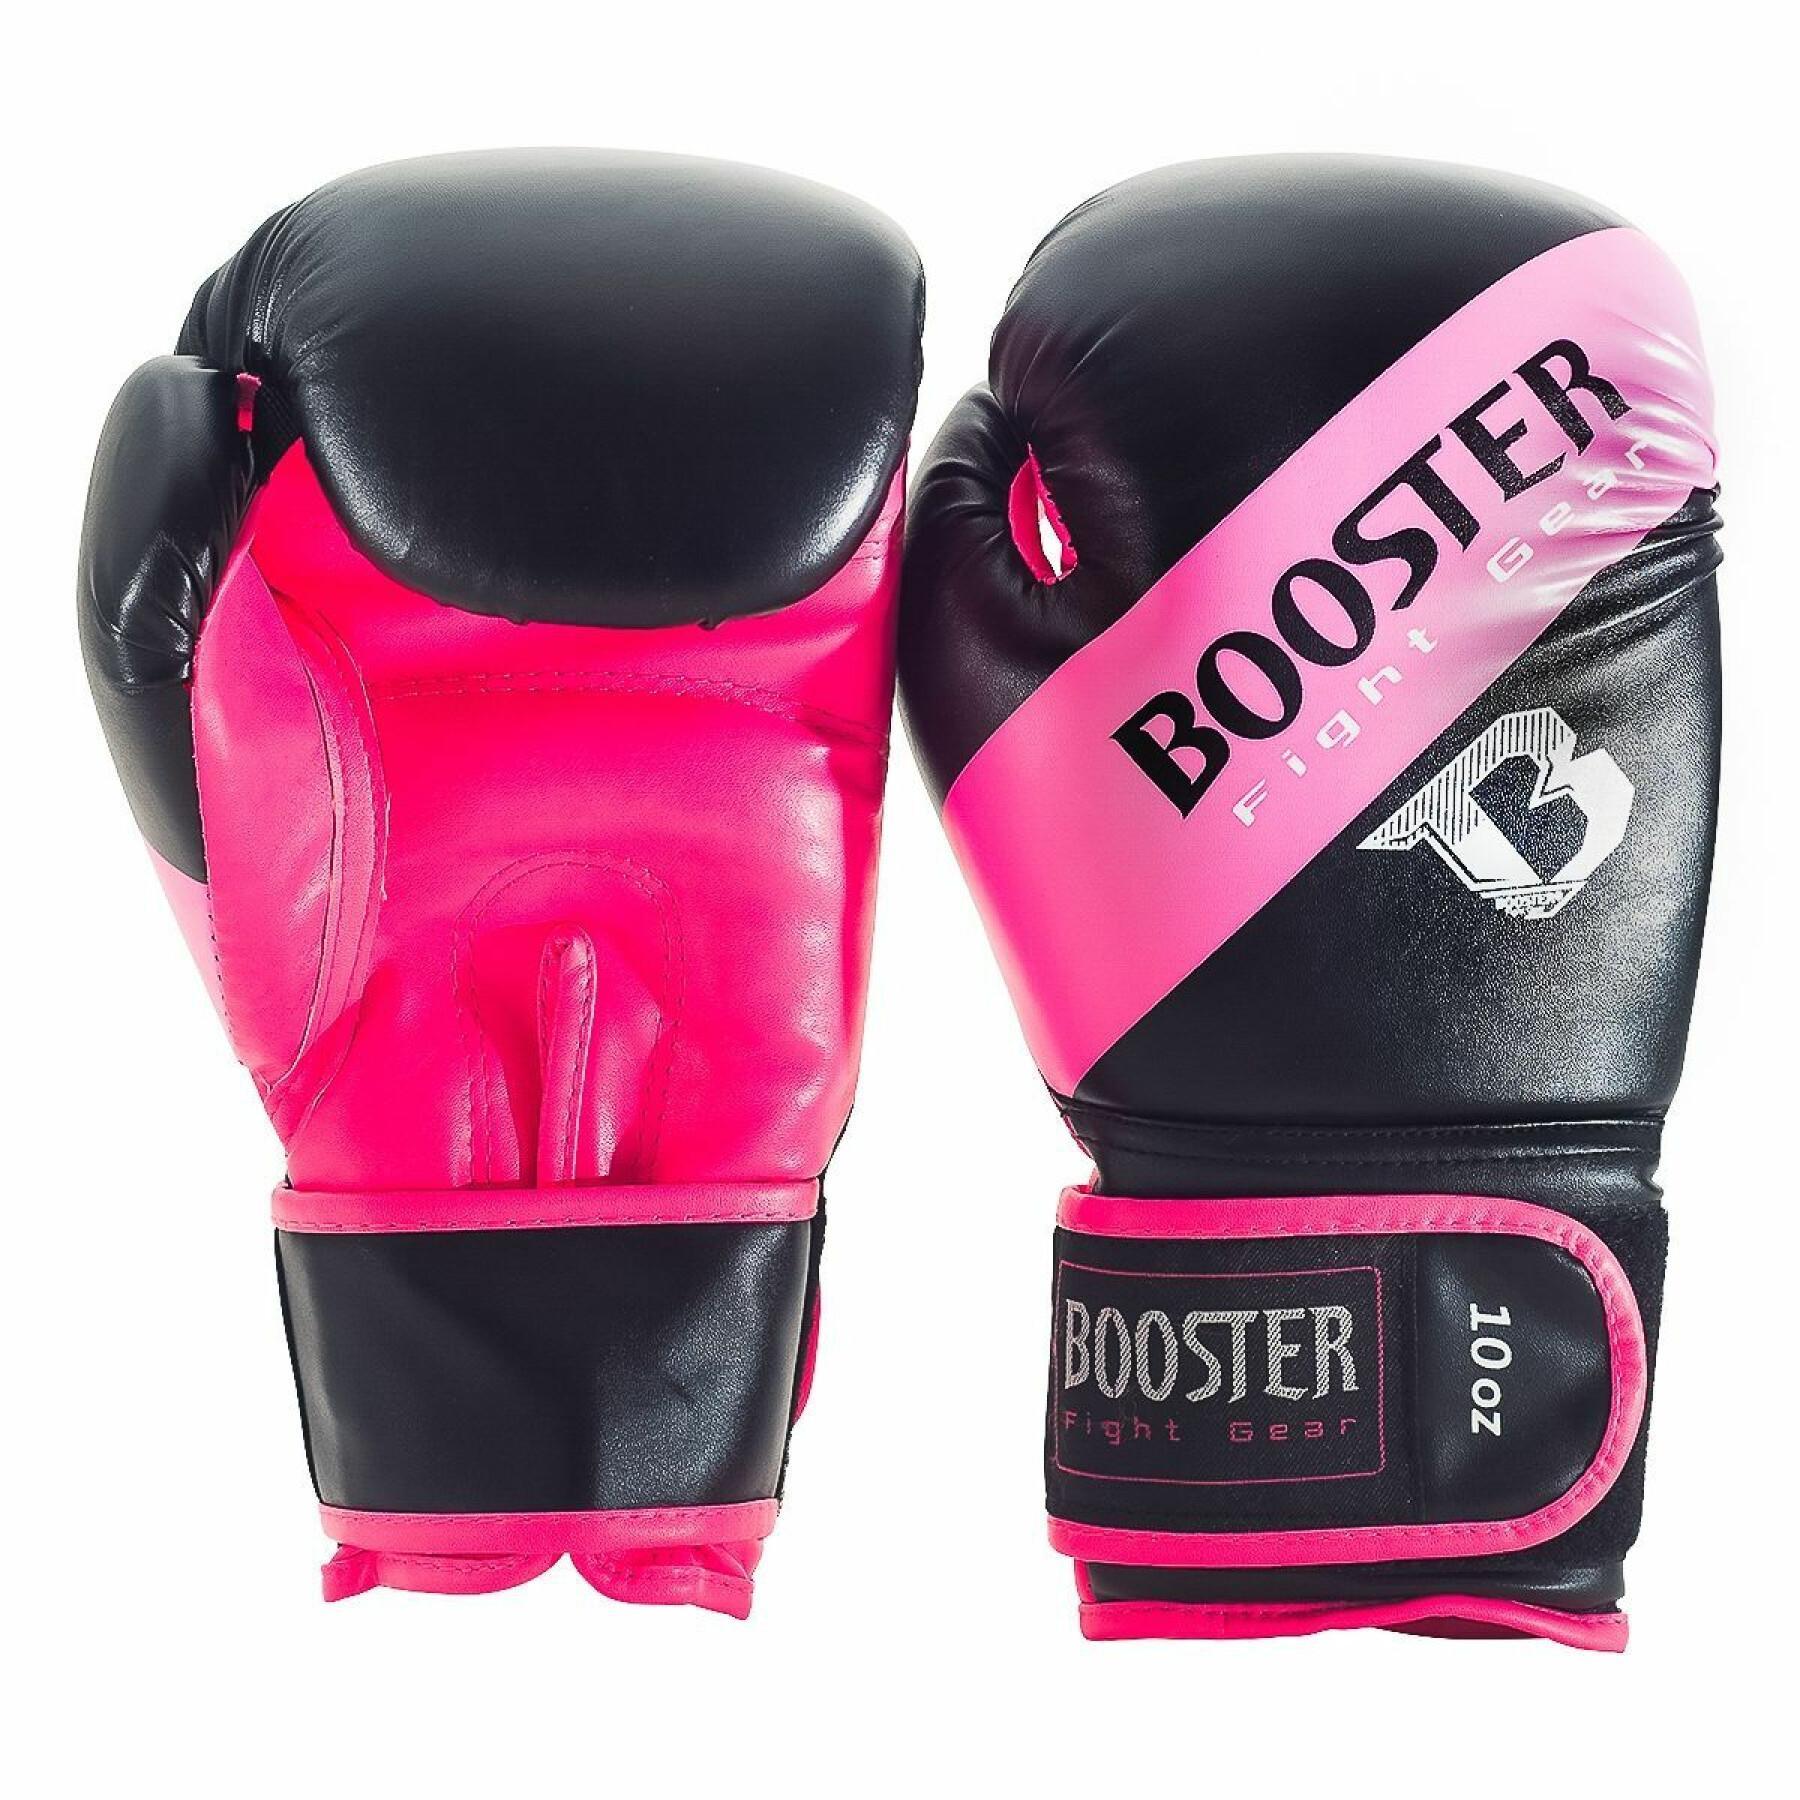 Boxing gloves Booster Fight Gear Bt Sparring